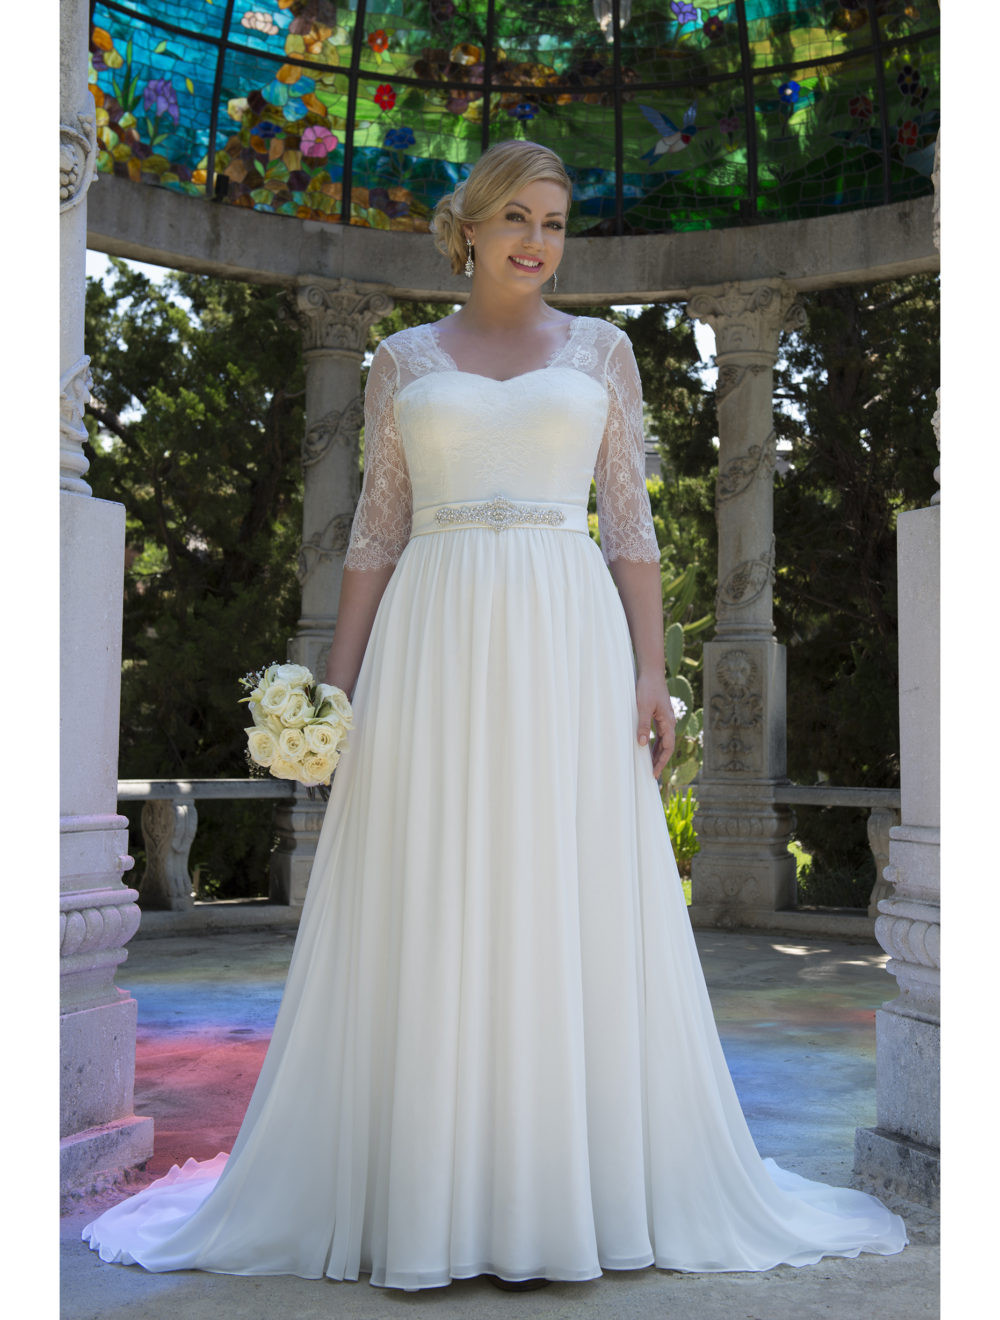 Plus Size Wedding Gowns With Sleeves
 Informal Lace Chiffon Modest Plus Size Wedding Dresses